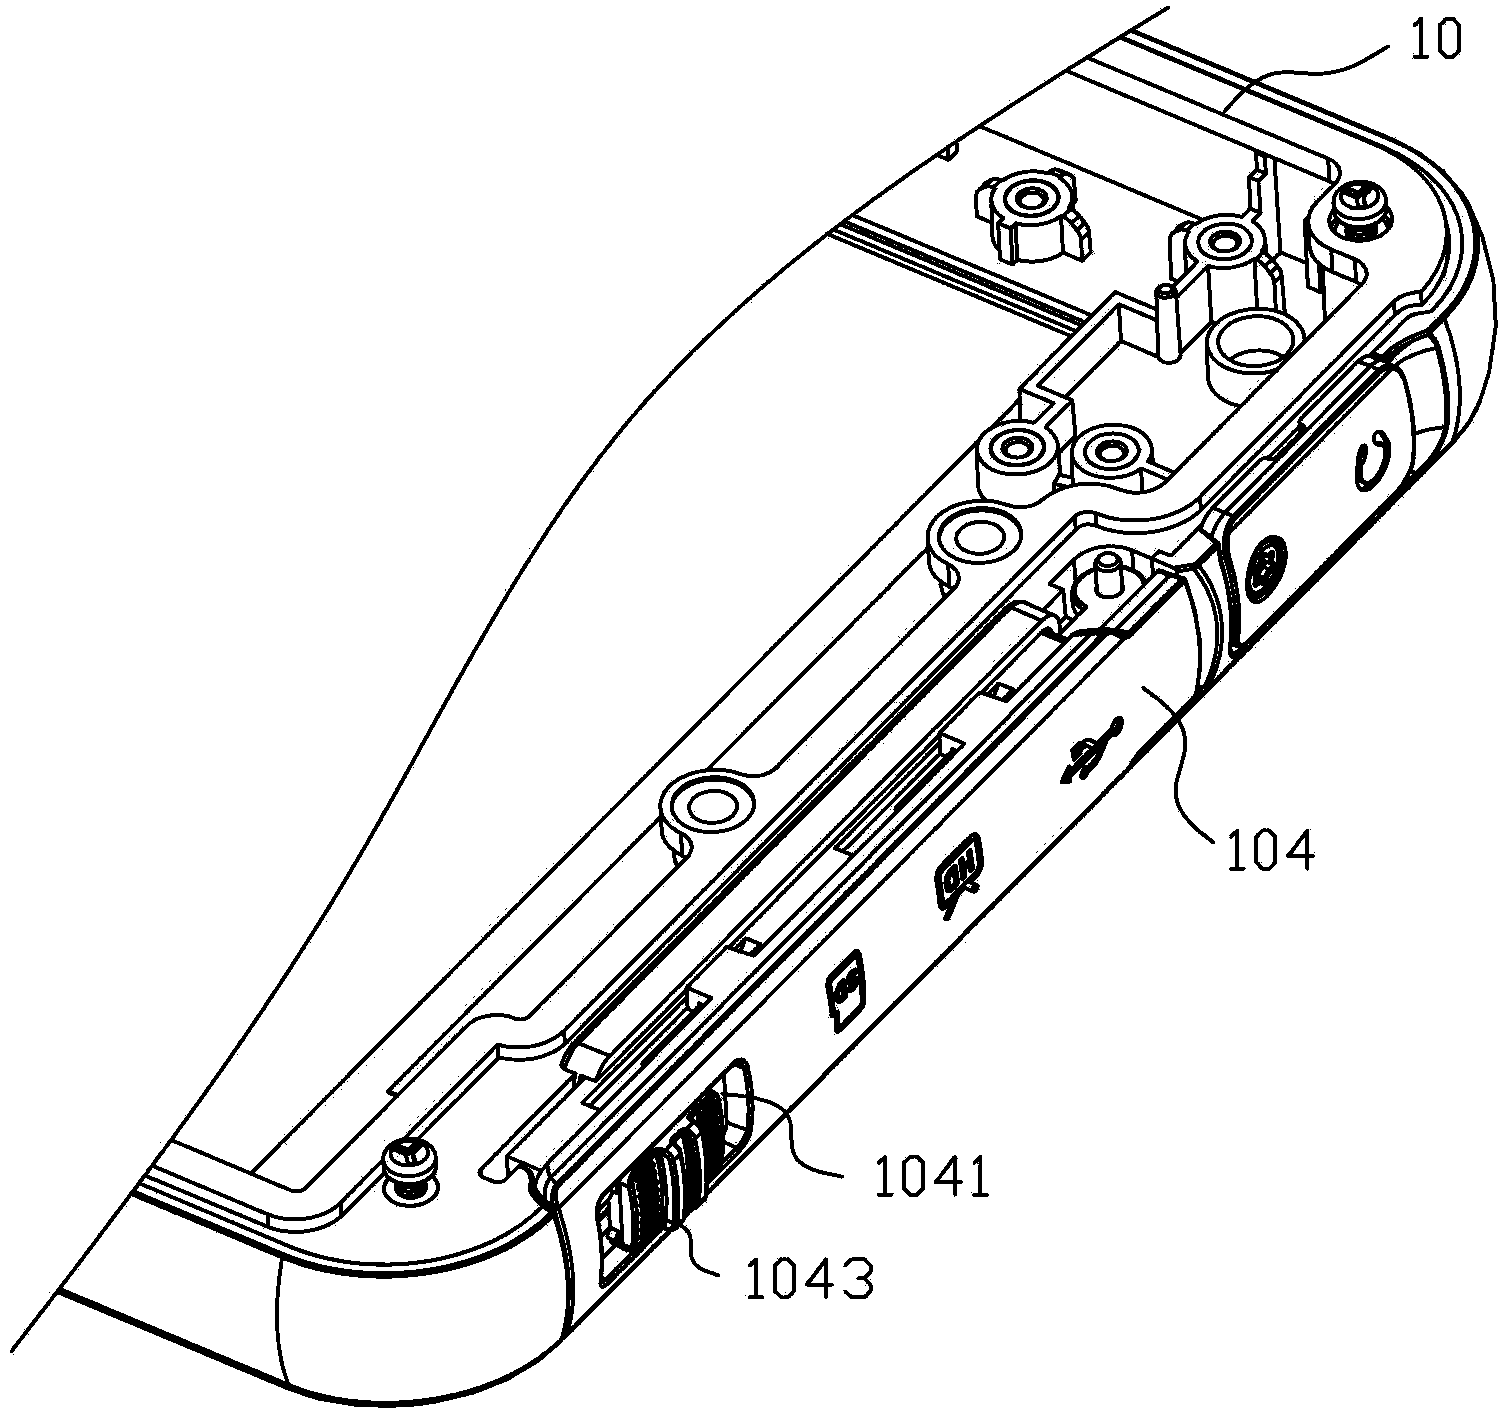 Sliding interface cover plate structure